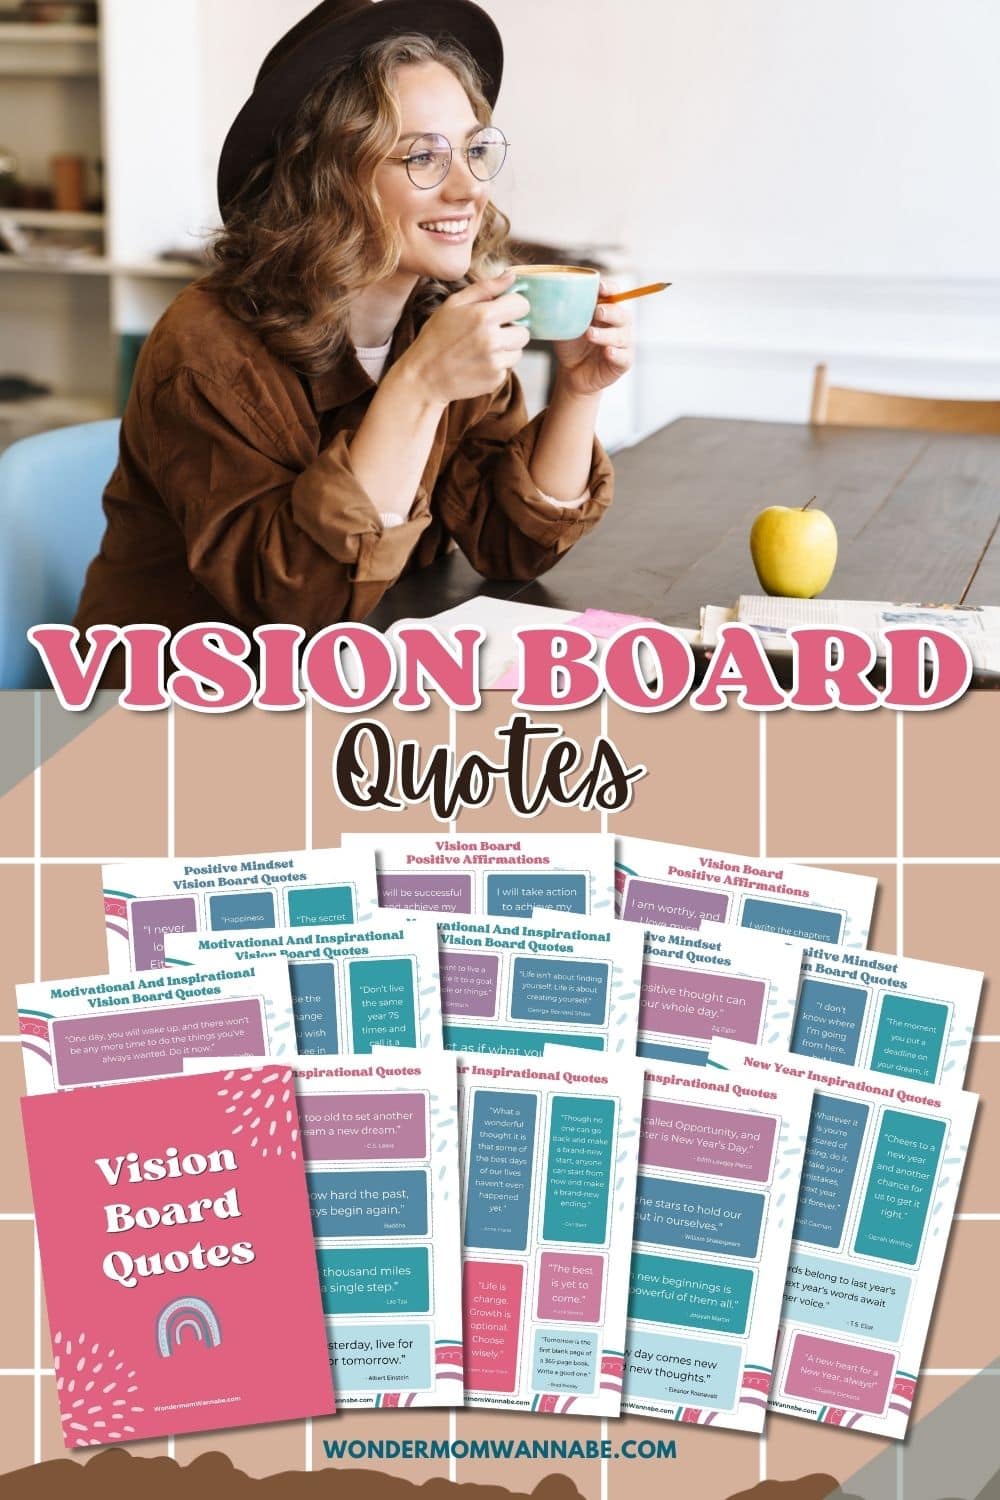 Explore an extensive collection of inspiring vision board quotes to ignite your motivation and manifest your dreams.